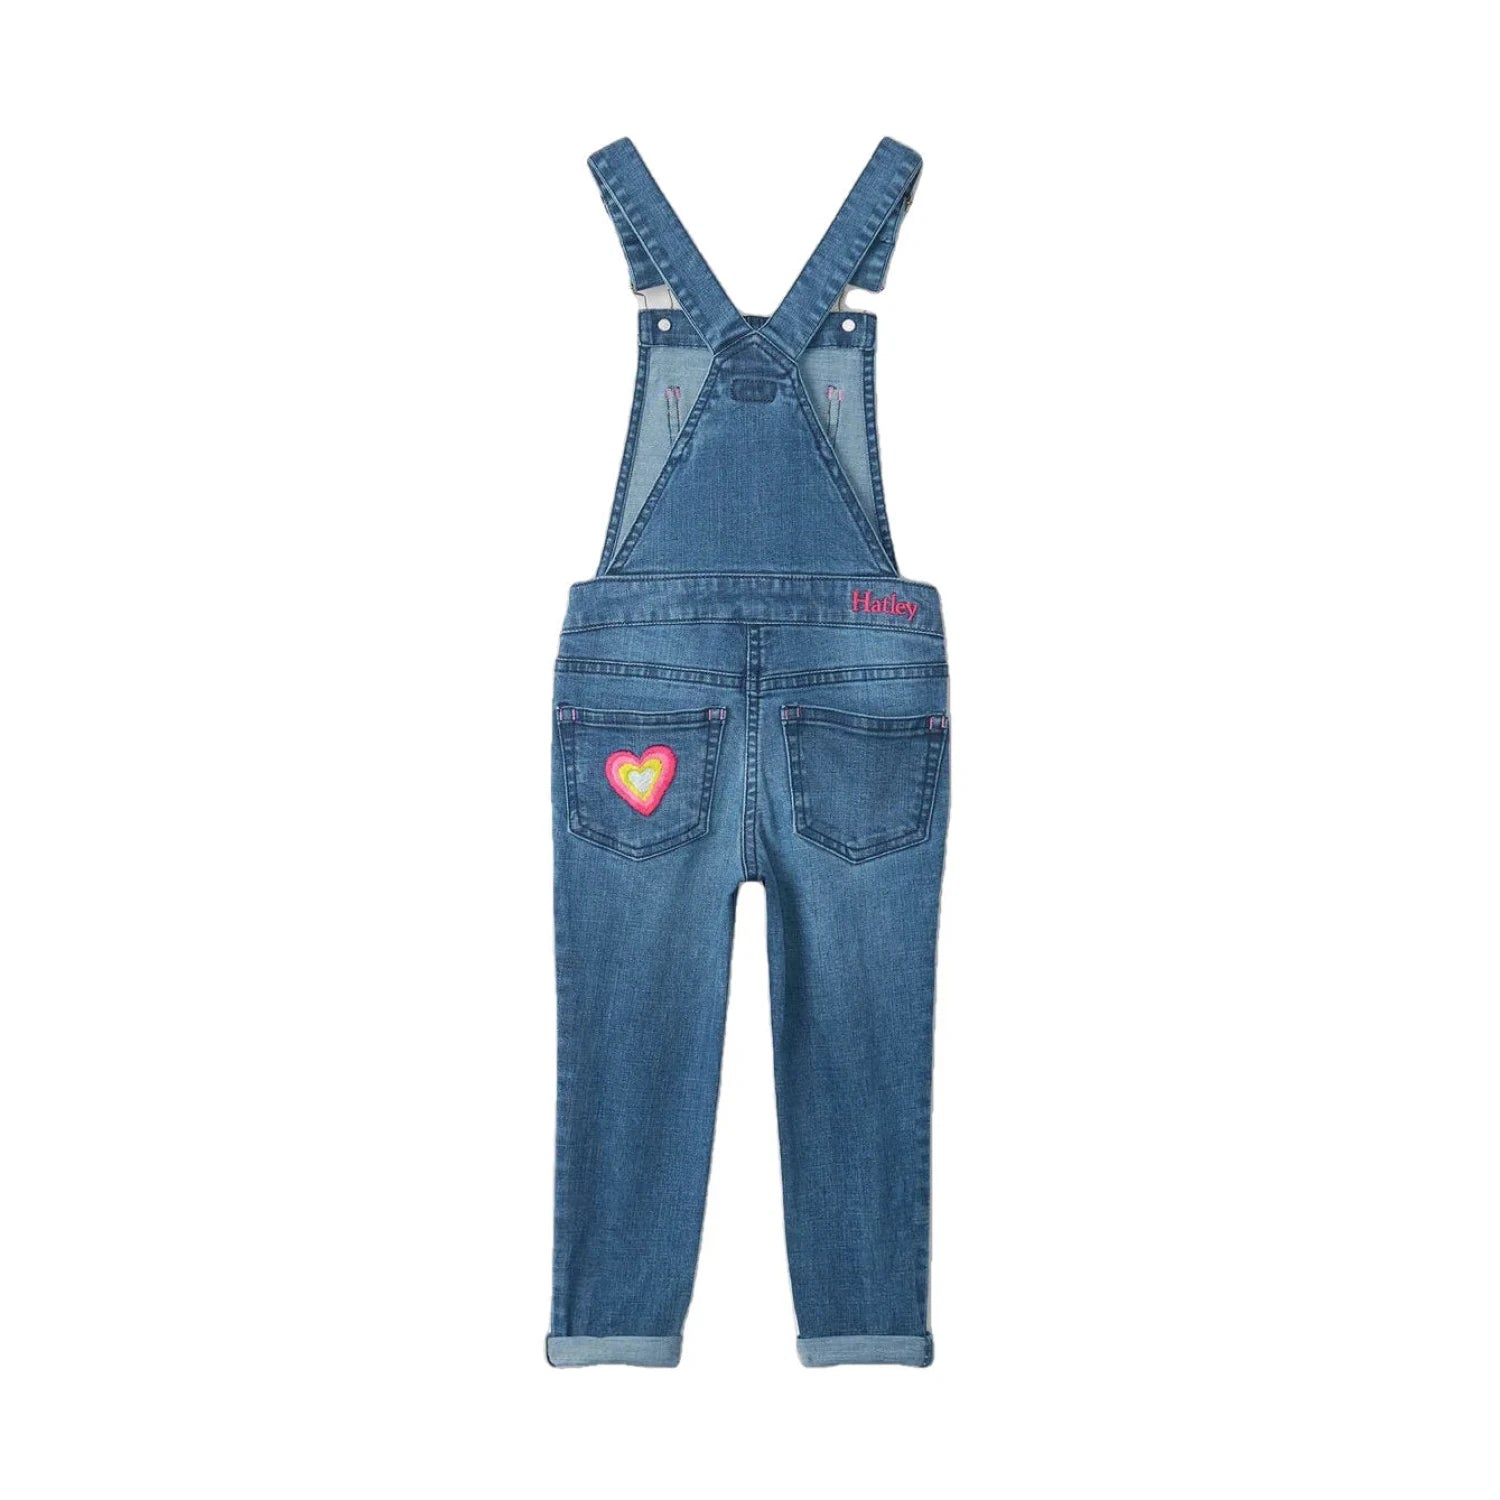 Hatley Girls Denim Stretch Classic Overalls, deep blue, front view. Pink hearts on left back pocket. Pink Hatley logo on right side waist.